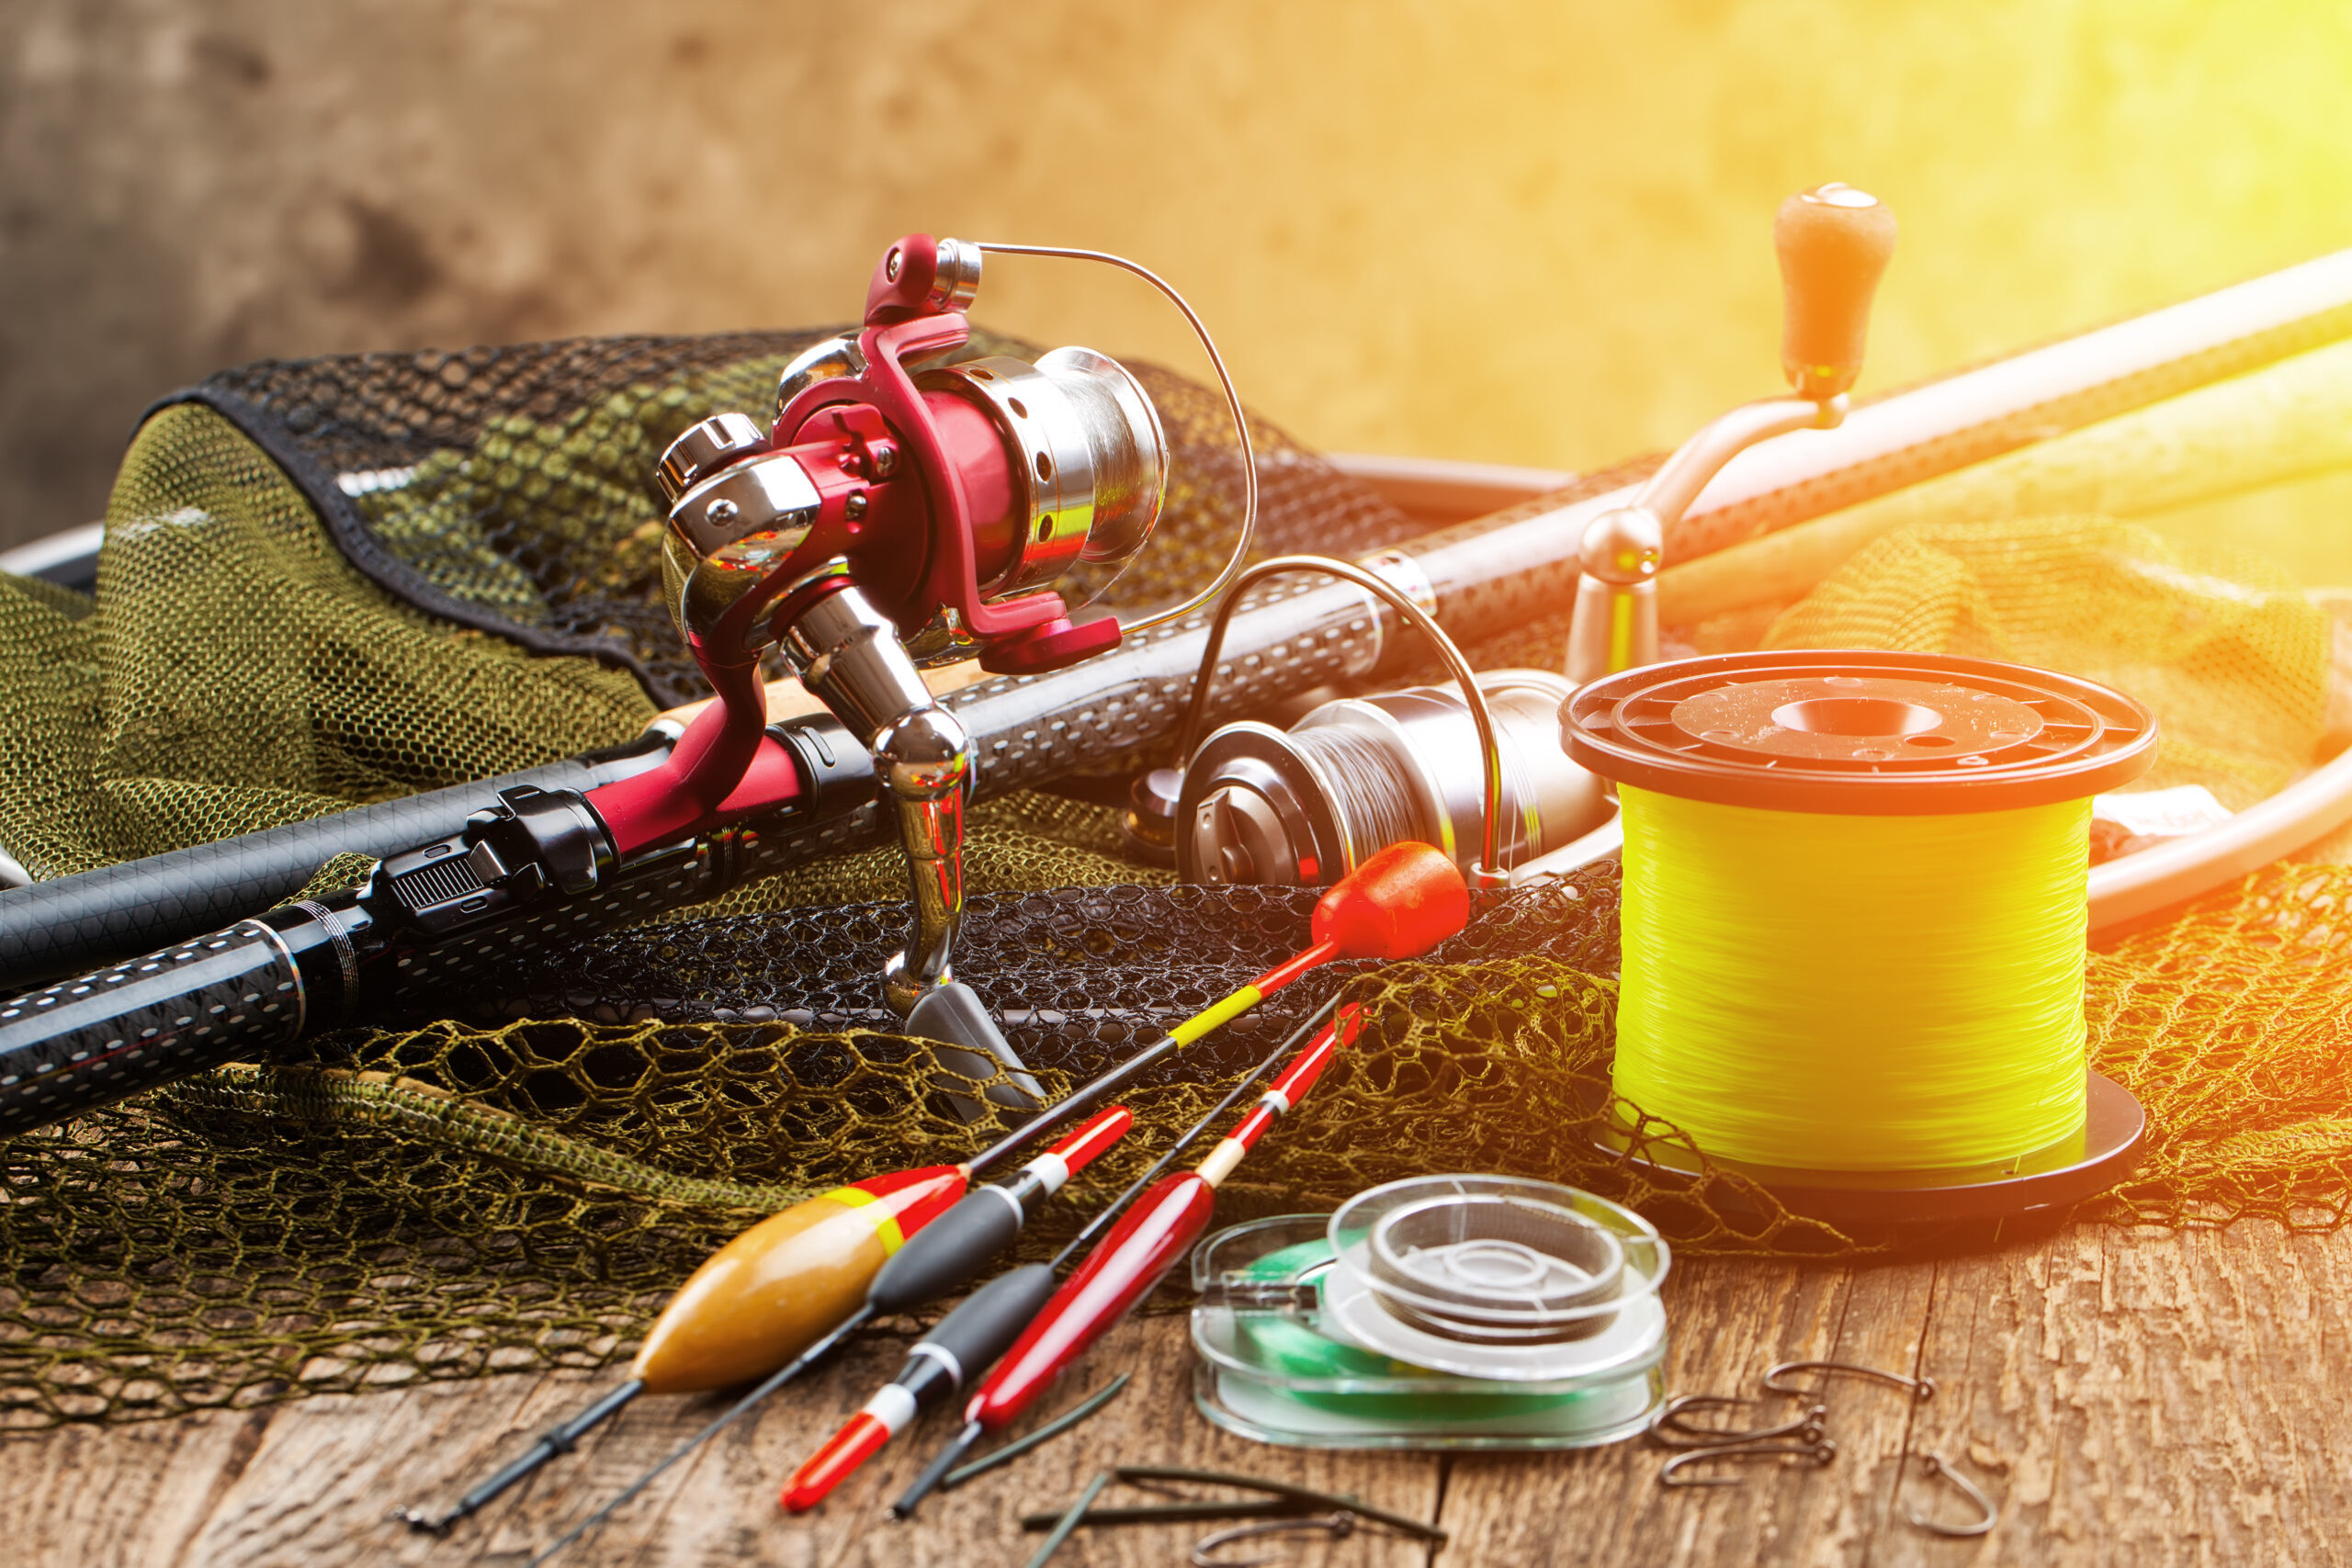 What To Look For When Buying a Tackle Box